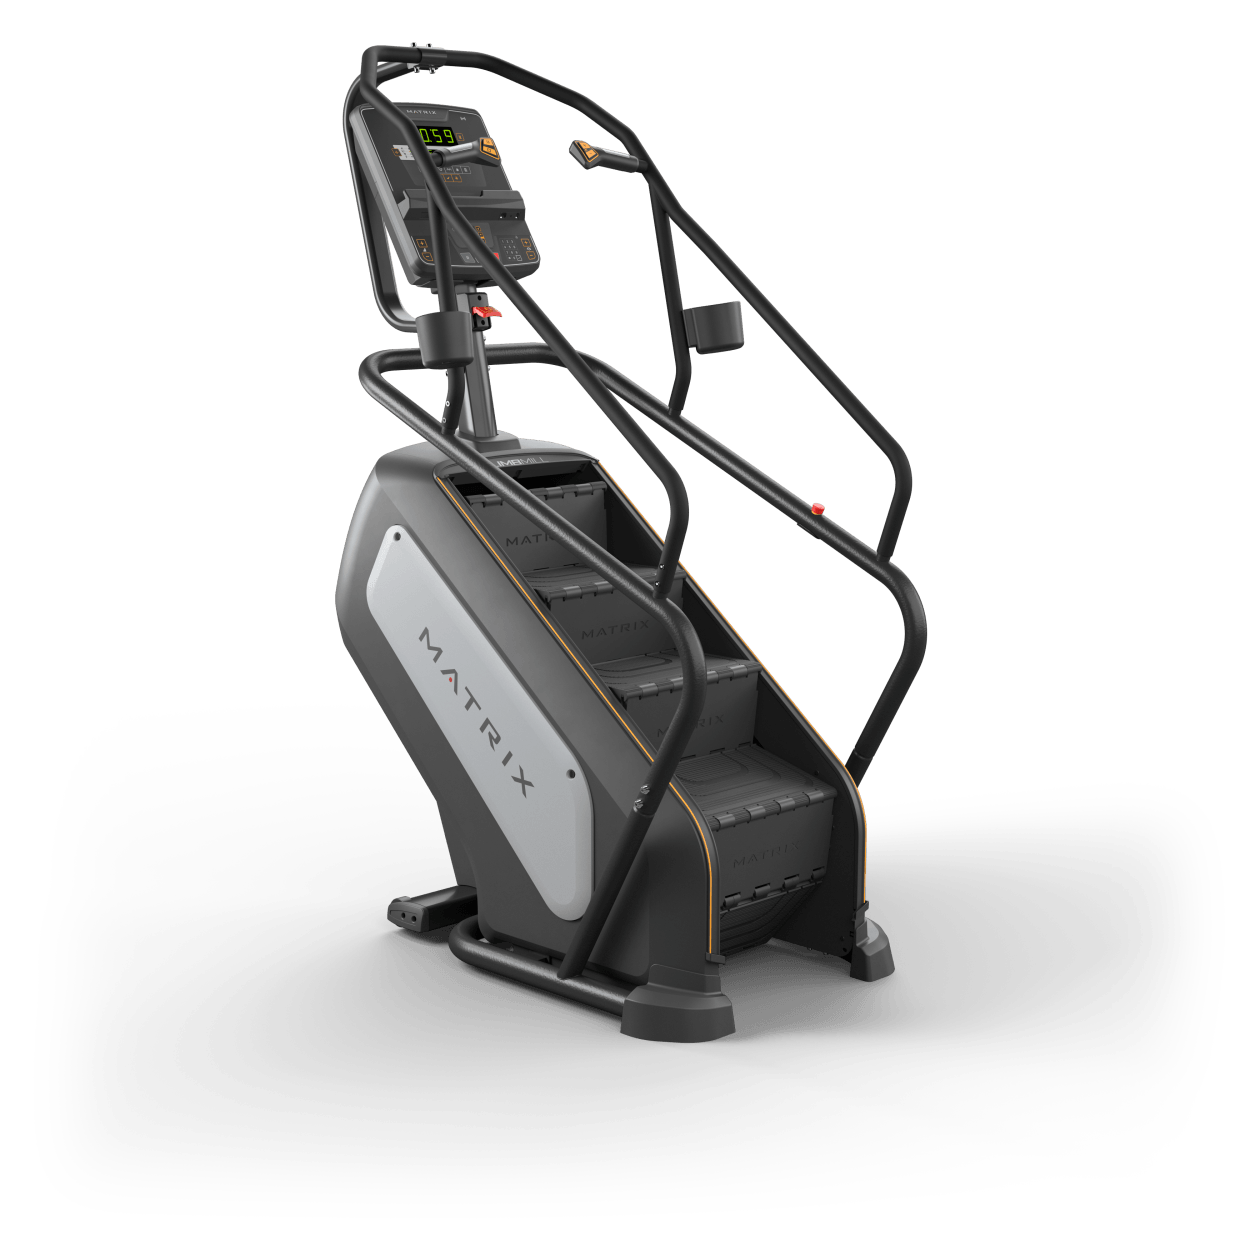 Matrix Fitness Endurance Climbmill with LED Console full view | Fitness Experience